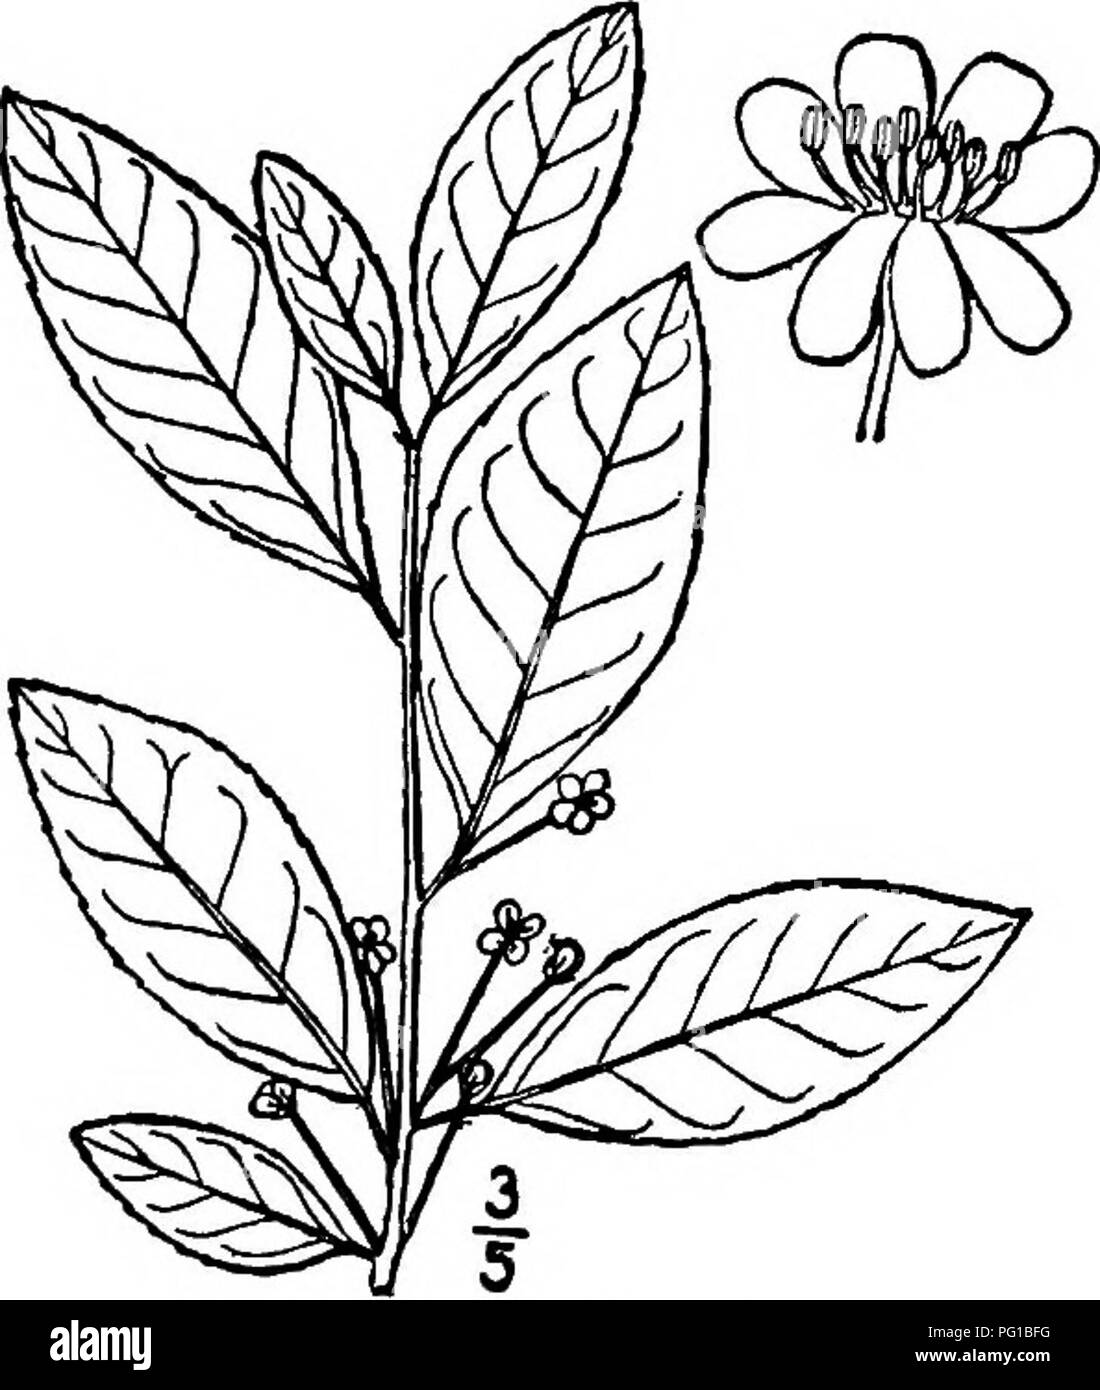 . North American trees : being descriptions and illustrations of the trees growing independently of cultivation in North America, north of Mexico and the West Indies . Trees. Fig. 570. — Black Alder. 2. WINTERBERRY—Hex lavigata (Pursh) A. Gray Prinos laruigata Pursh This shrub of swampy grounds and wet woods from Maine to Pennsylvania, Georgia, and Kentucky sometimes becomes a tree 6 meters tall. It is also called the Smooth winterberry and Hoopwood. The twigs are smooth and usually dark gray. The leaves are deciduous, rather thin, elliptic, oval or lanceolate, 4 to 8 cm. long, sharply or ofte Stock Photo